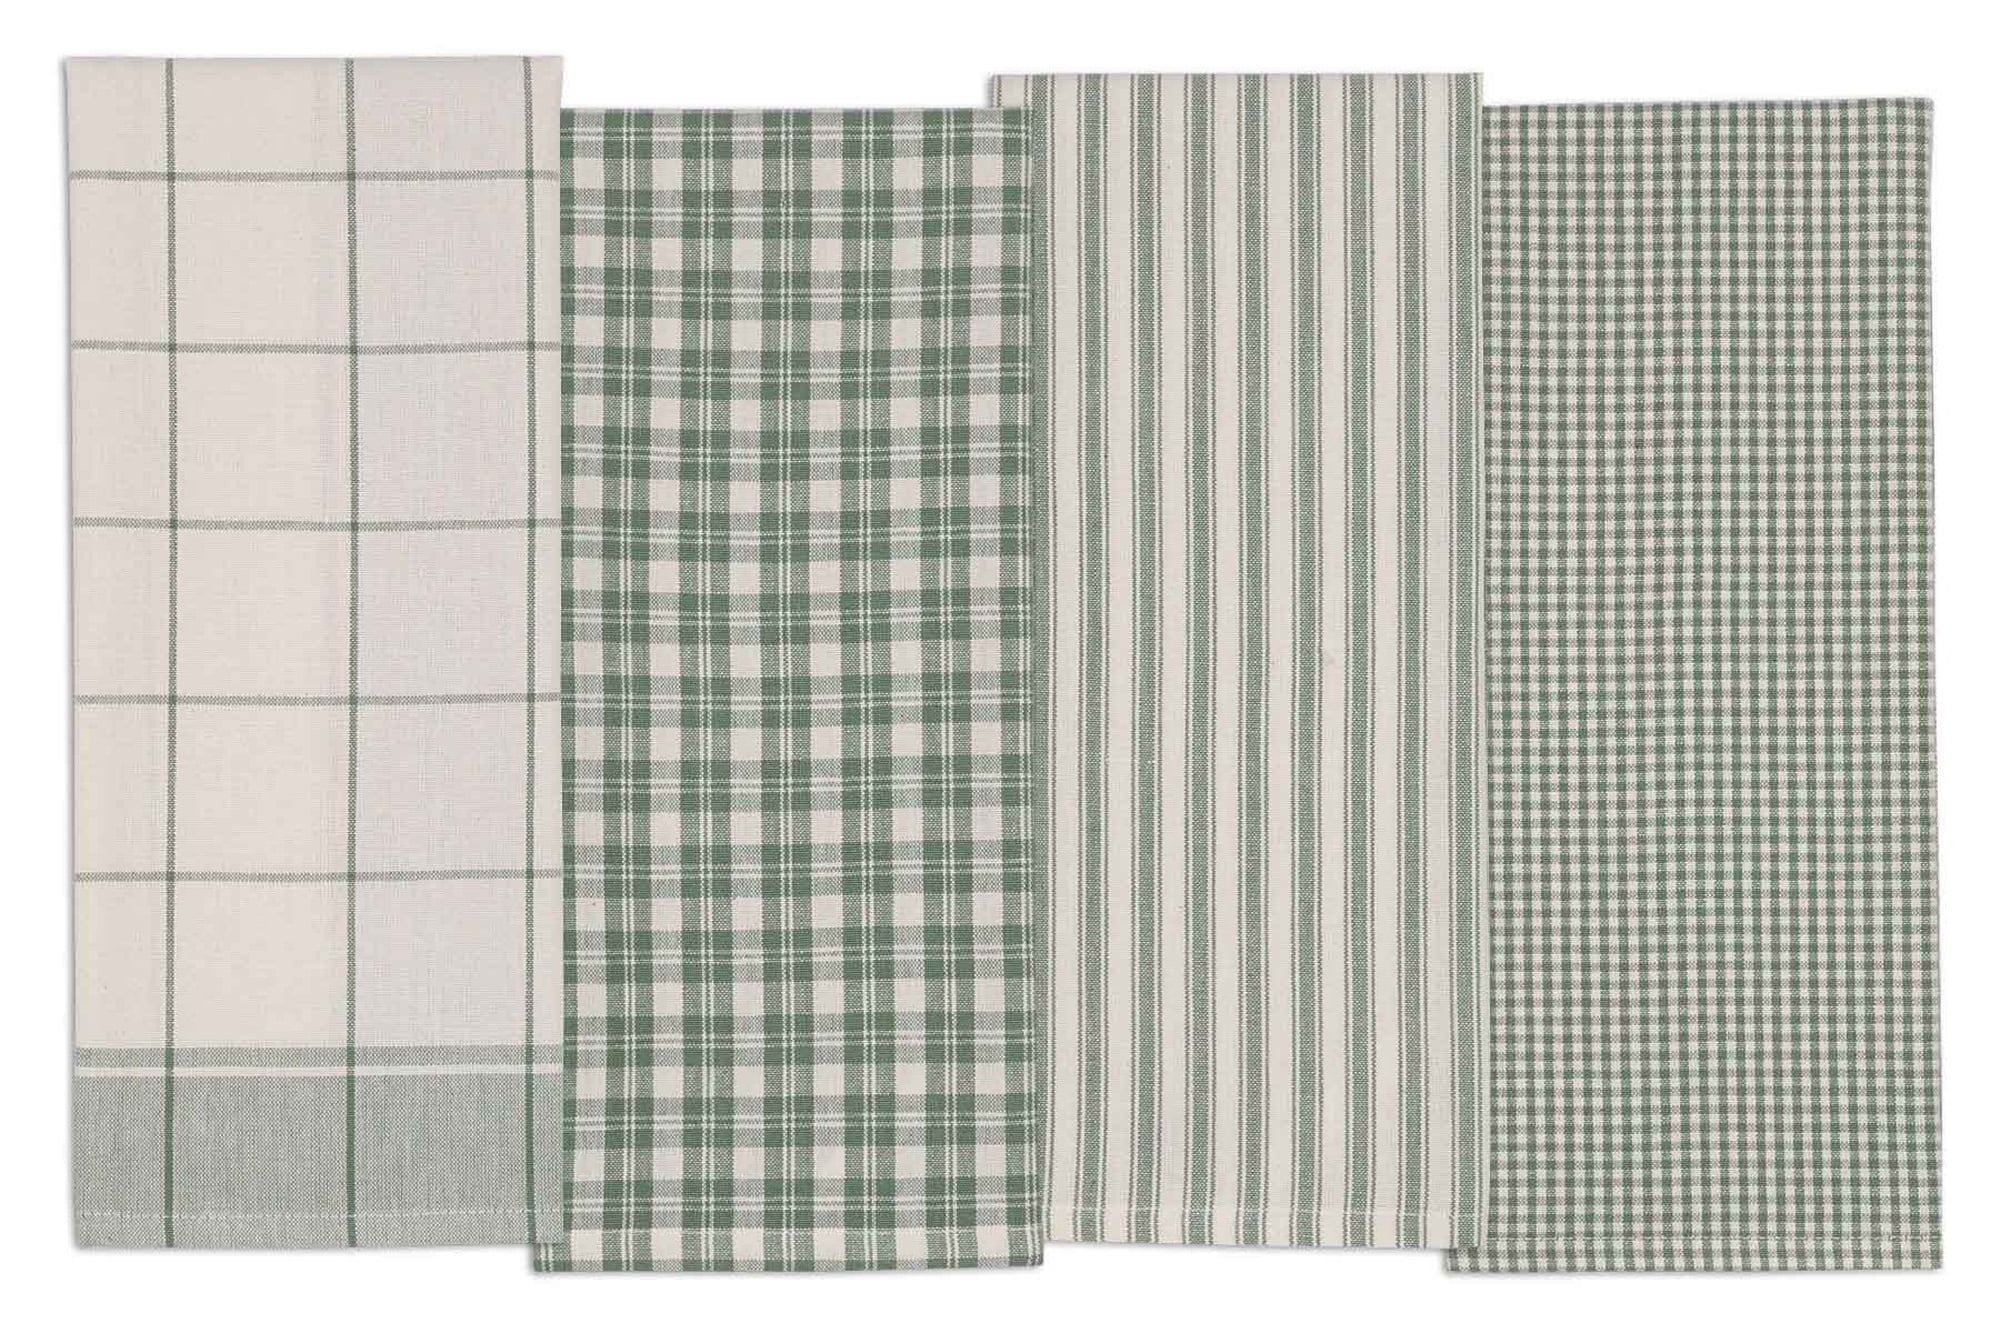  ARTSHOWING Sage Green Kitchen Towels, Dish Towels for Kitchen,  Ultra Soft 18 X 28 Inch Bar & Tea Towels, Super Absorbent Cleaning Cloths Dish  Towel 3 PCS, Checkerboard Green Plaid Design 